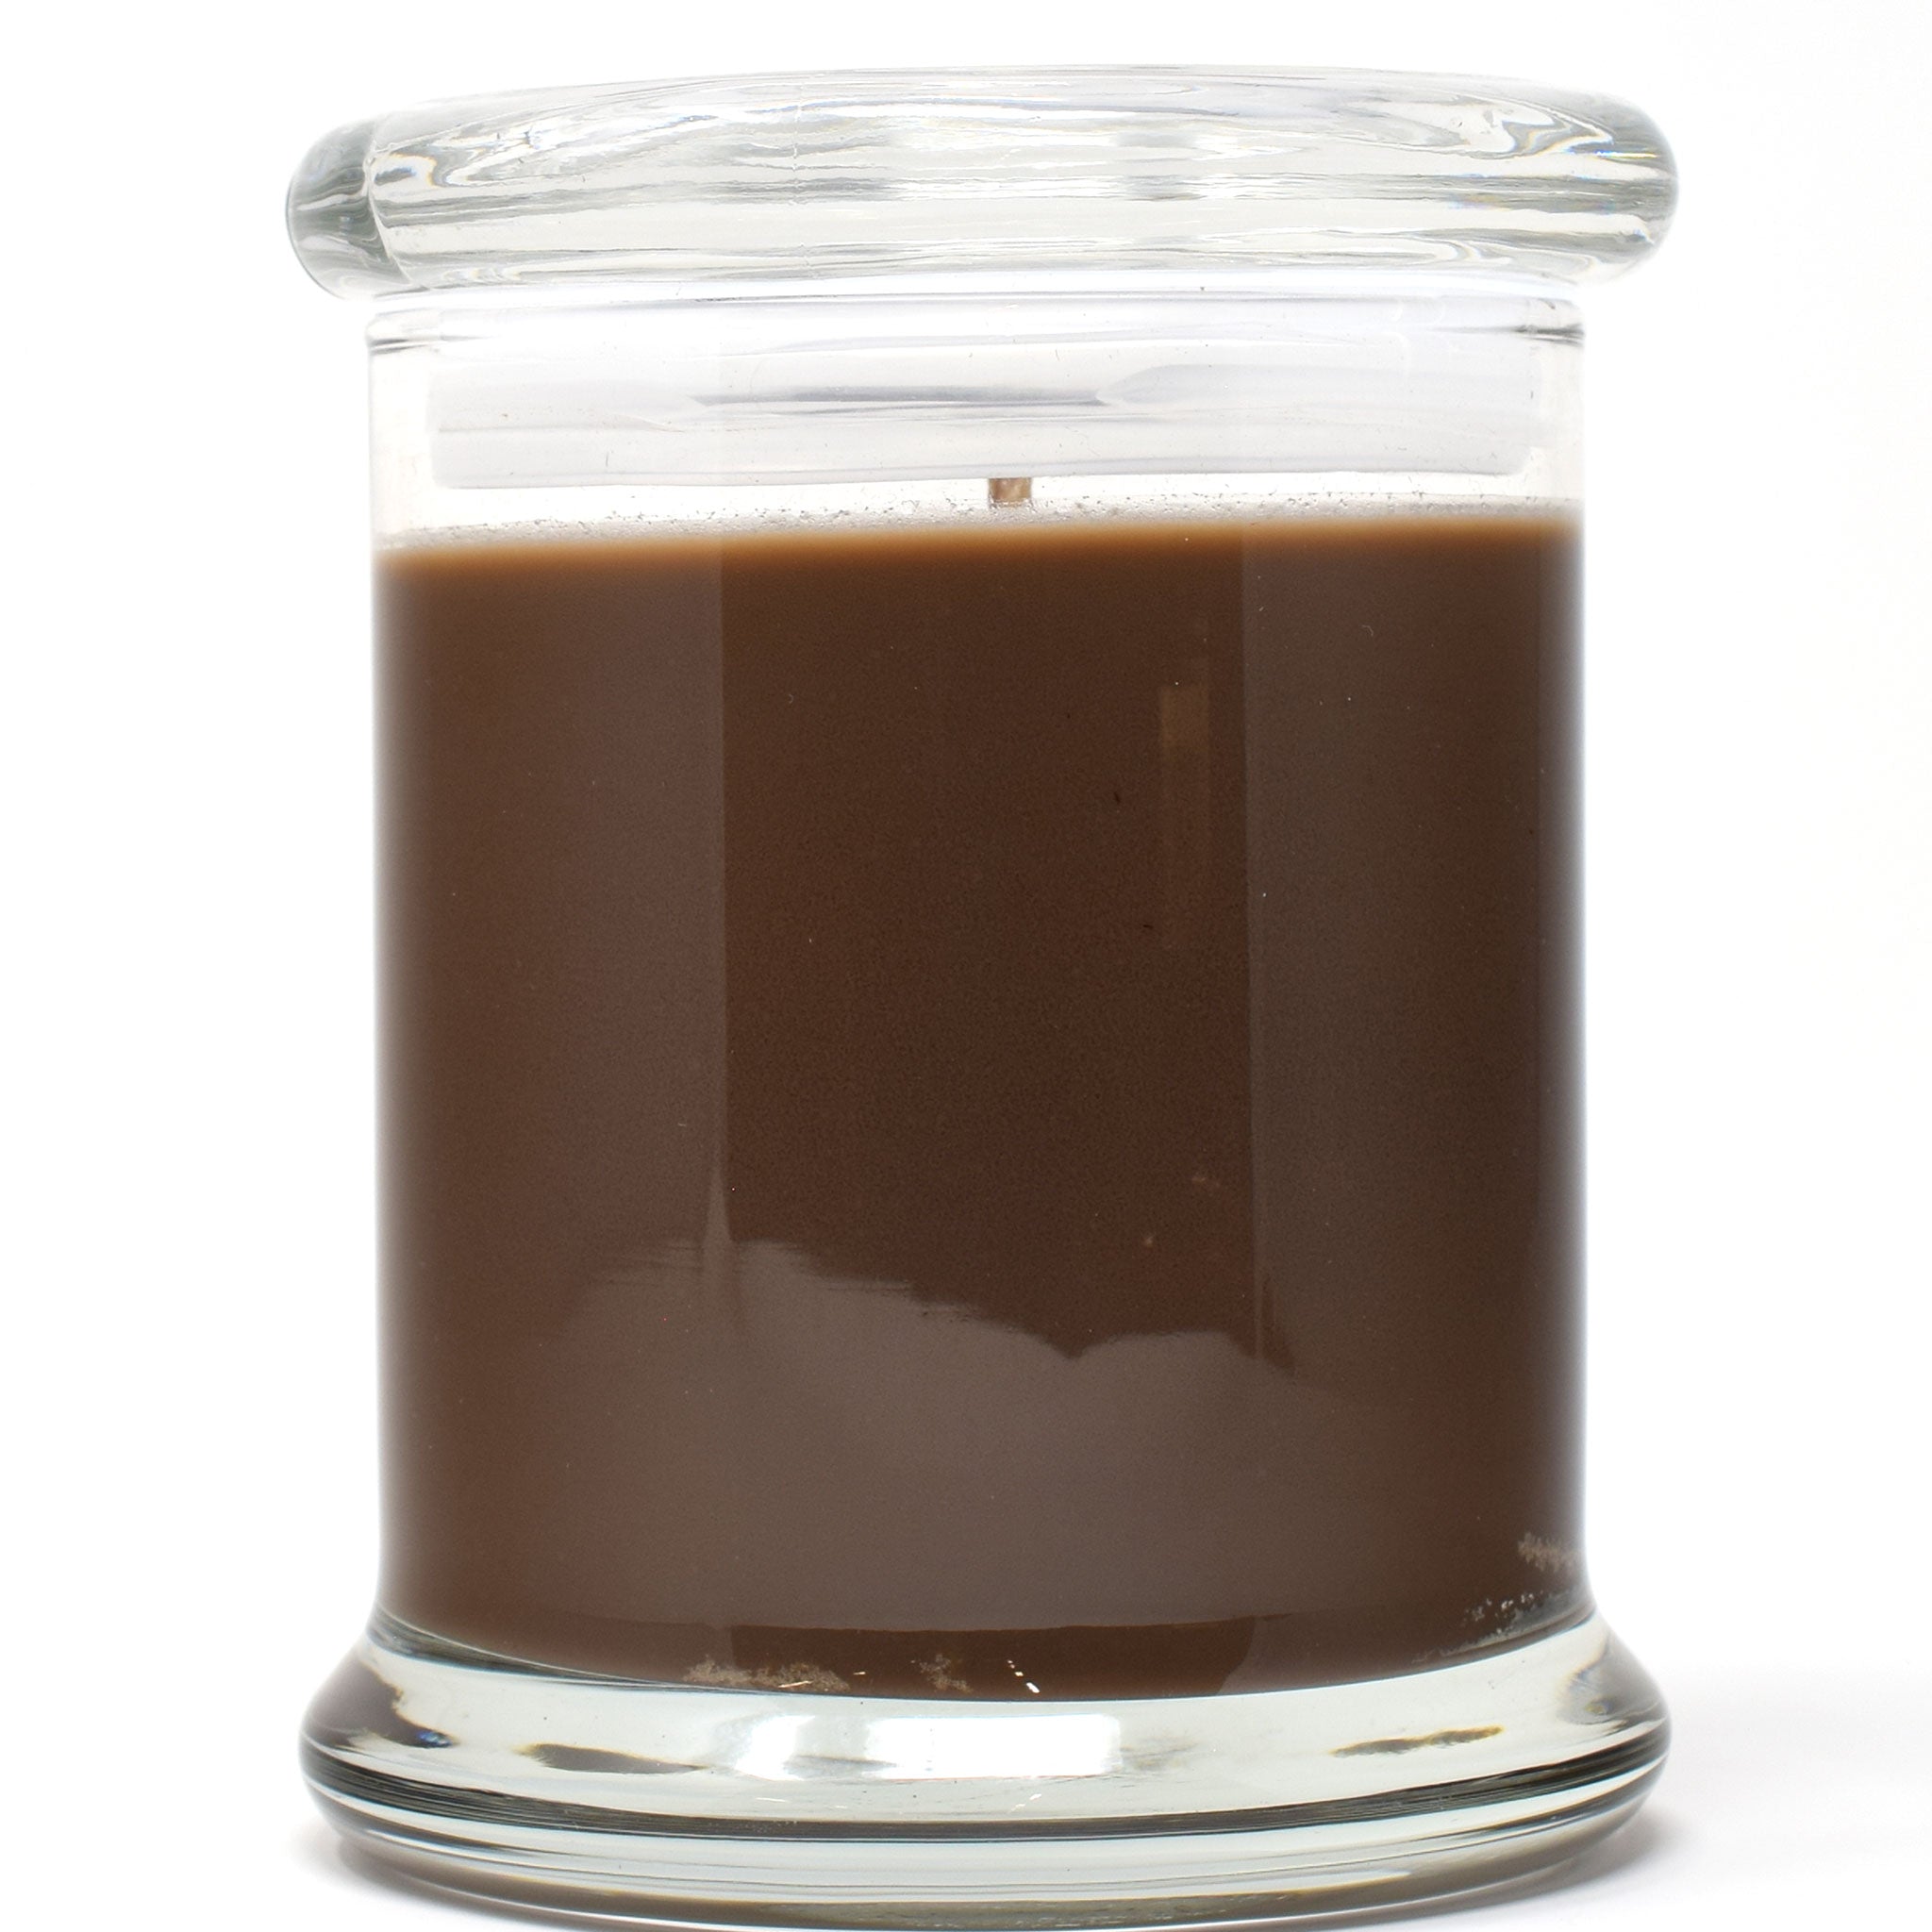 Caffe Latte, 9oz Soy Candle Jar - Candeo Candle